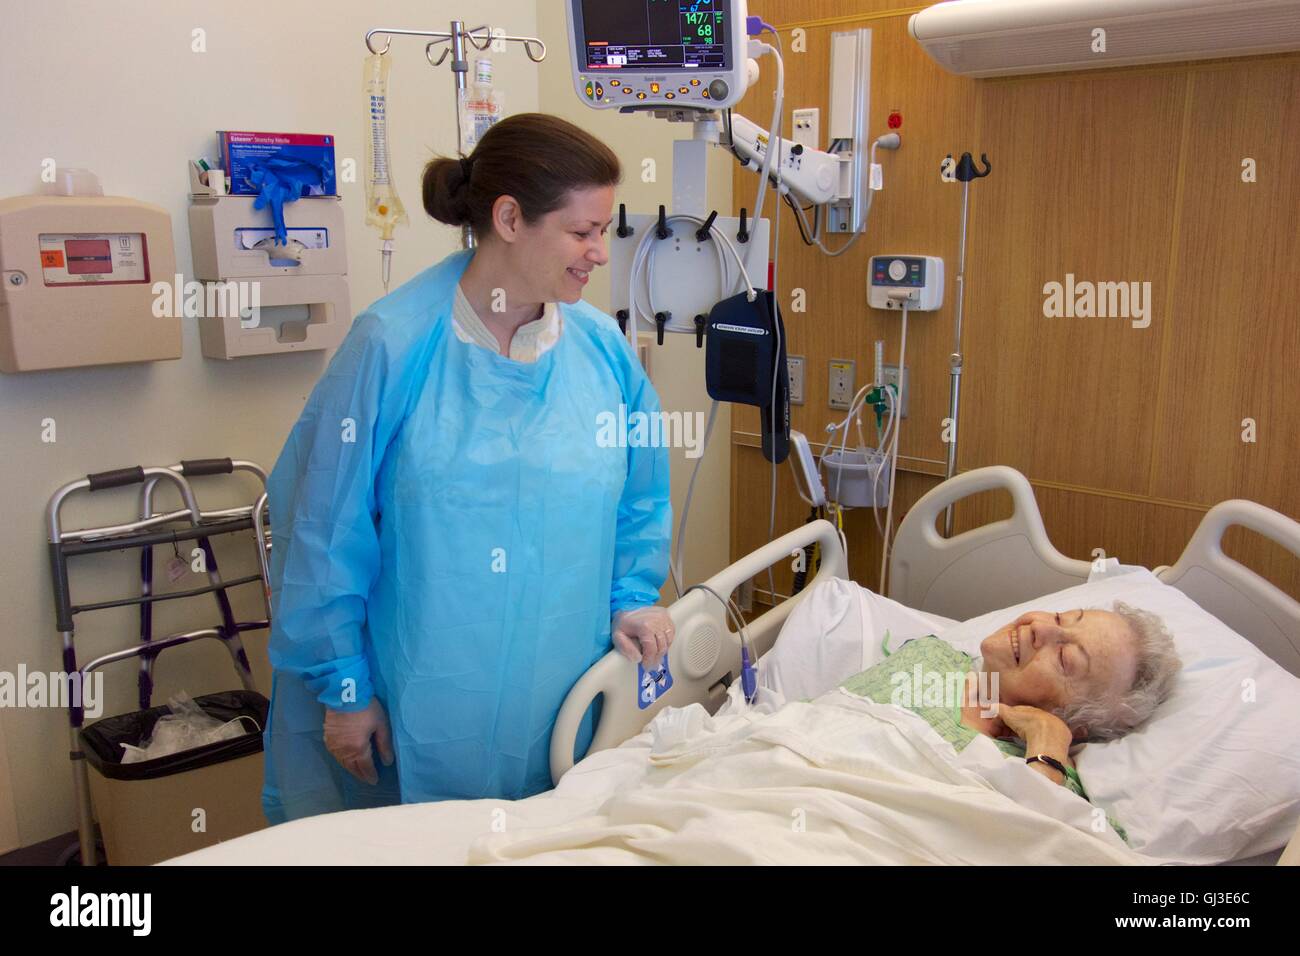 Woman visiting sick grandmother in hospital, wearing gown and gloves due to Clostridium difficile infection in older woman. Stock Photo